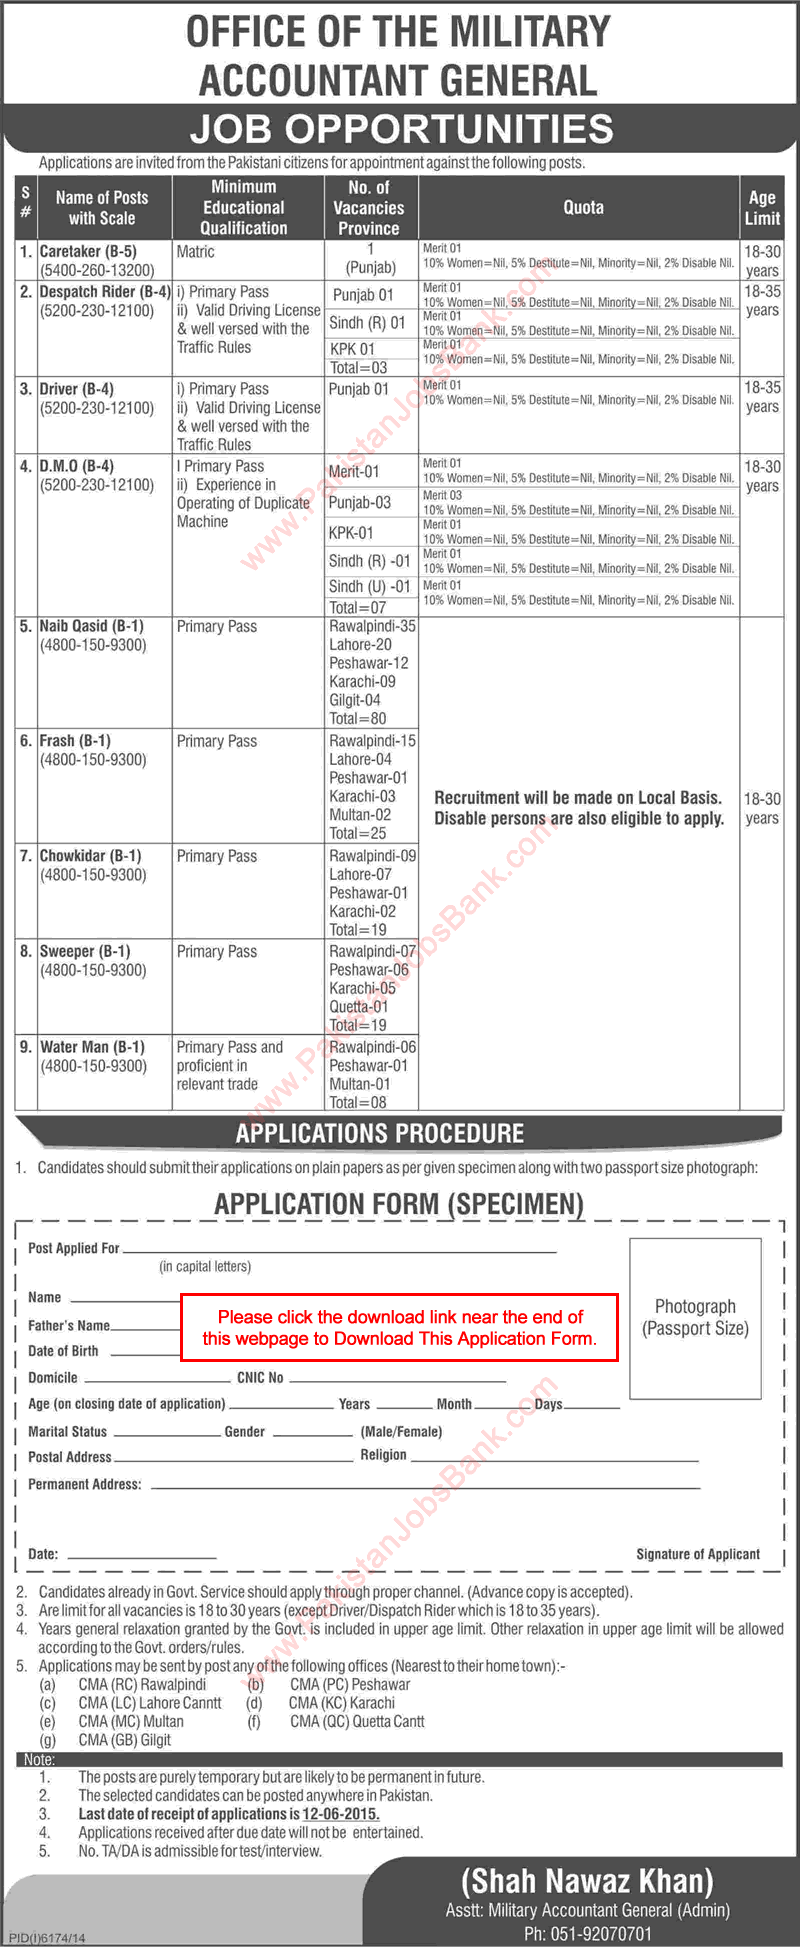 Jobs Opportunities in Military Accountant General 2015 May Application Form Download Pakistan